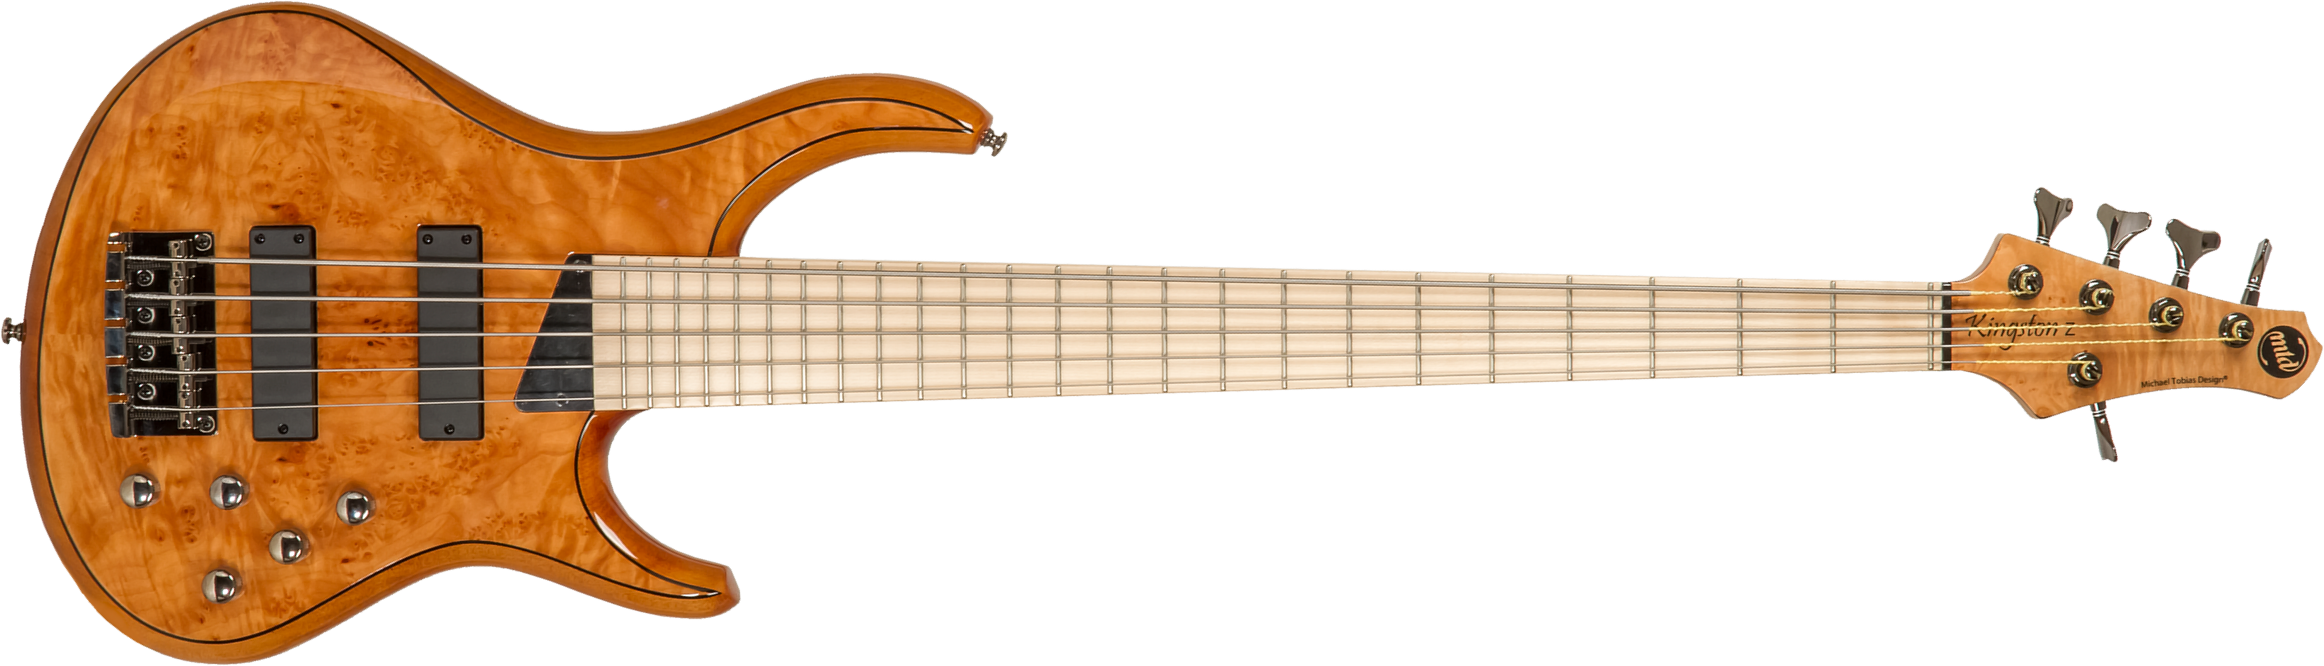 Mtd Kz5mp-ng Kingston 5c Active Mn - Natural Gloss - Solid body electric bass - Main picture